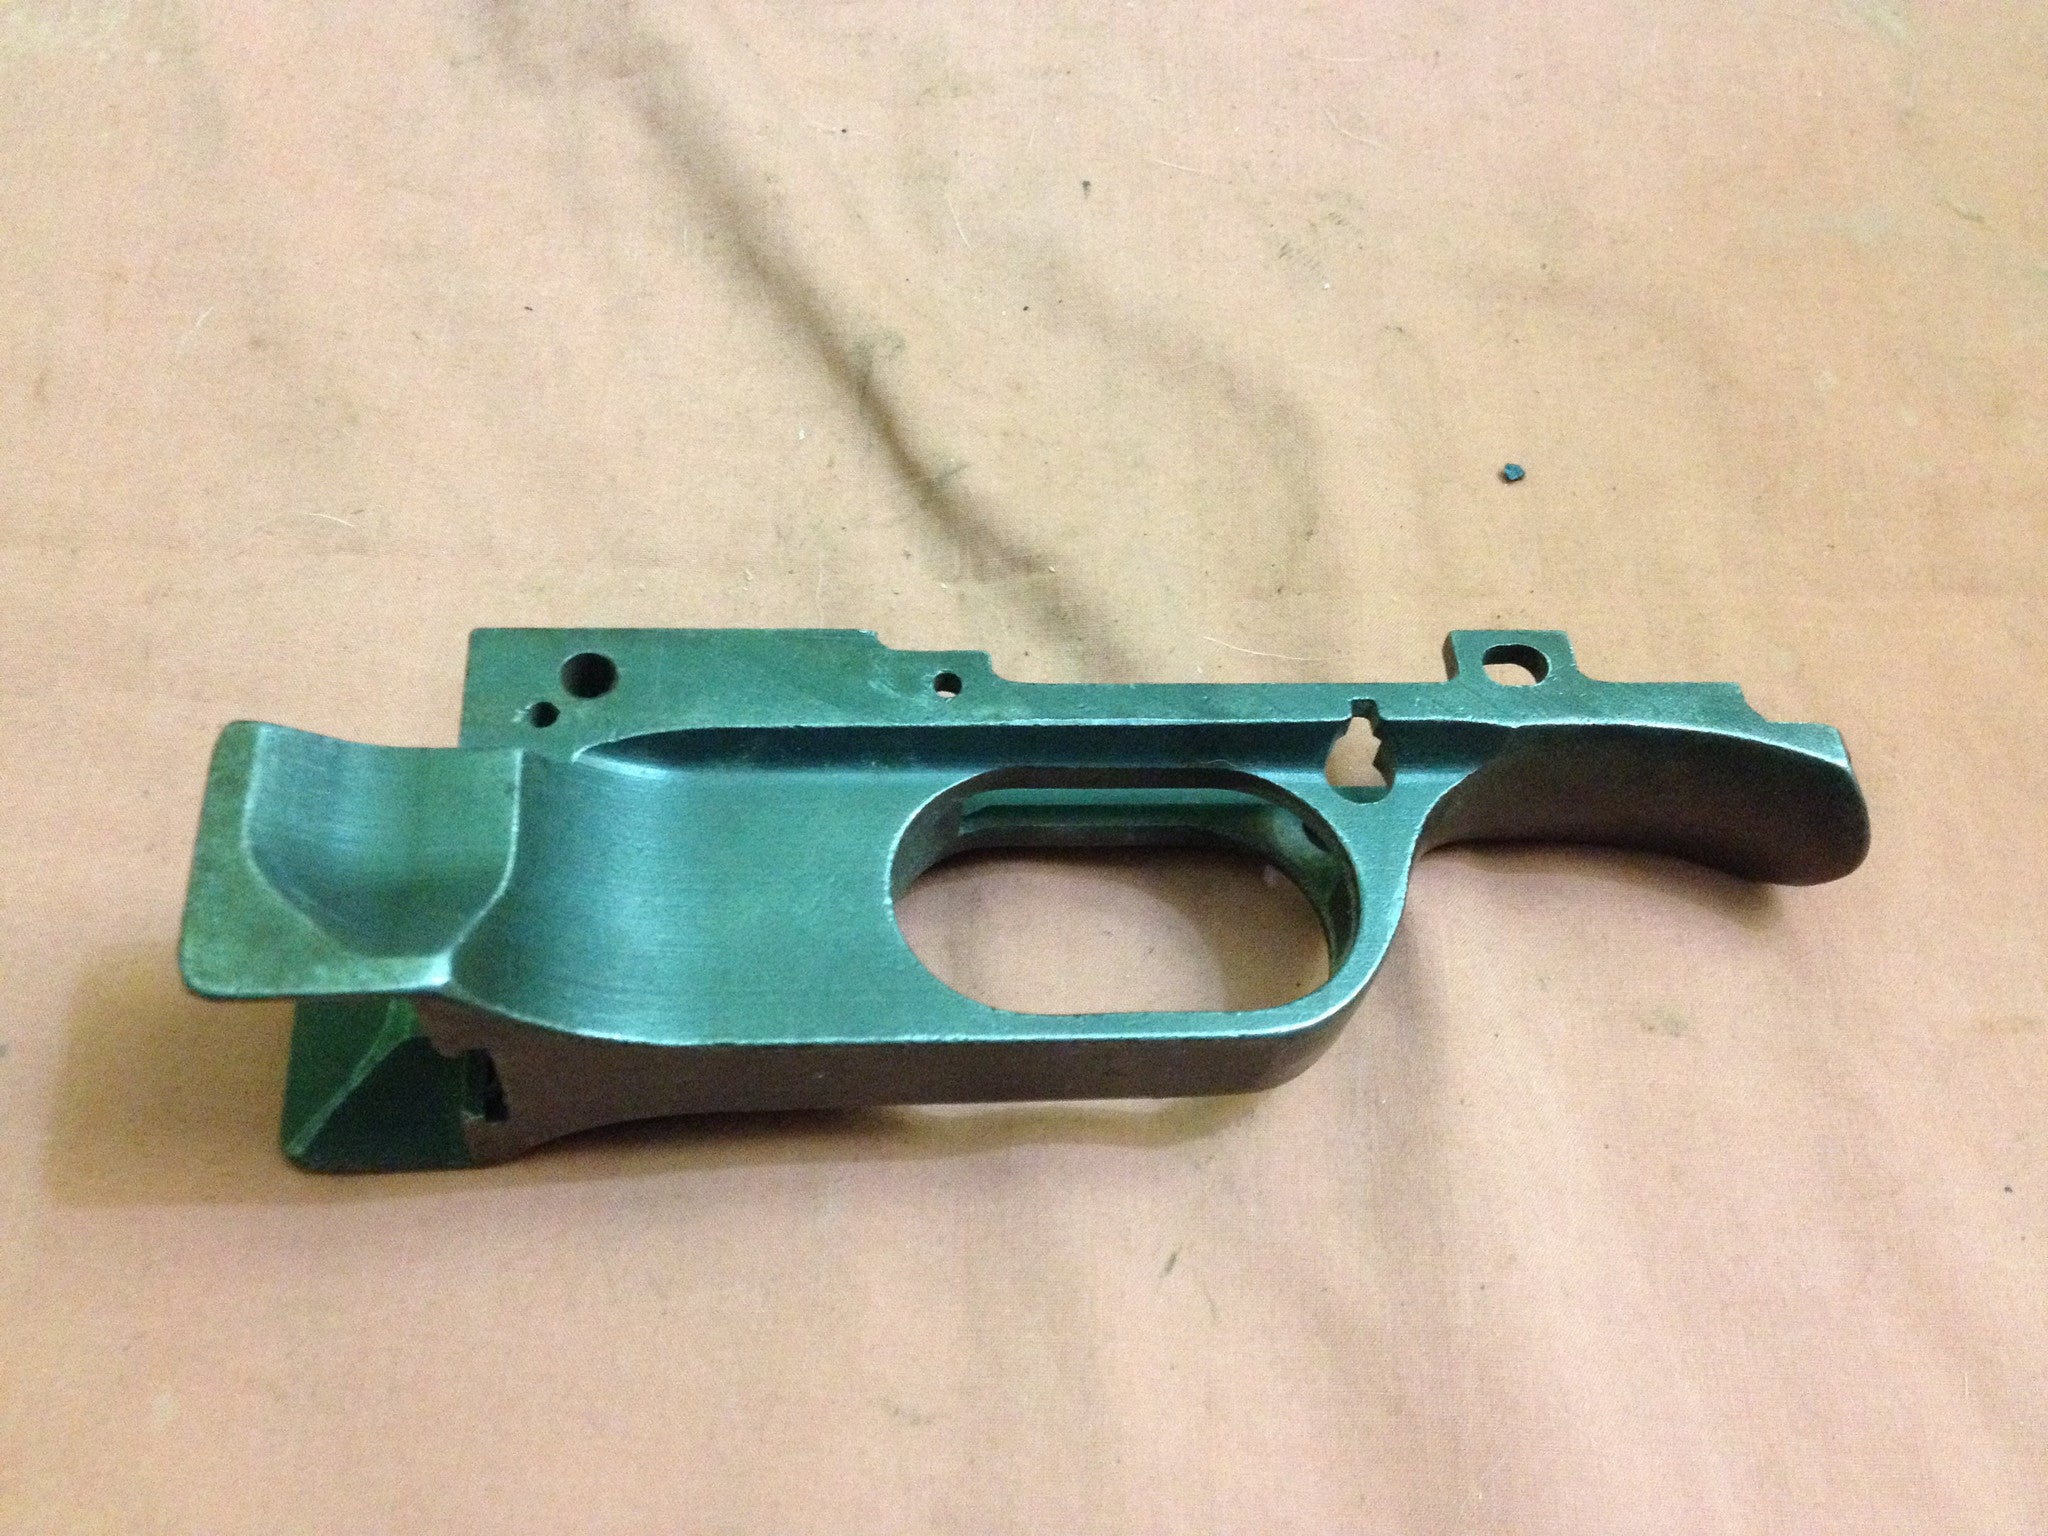 Stripped A2 trigger housing